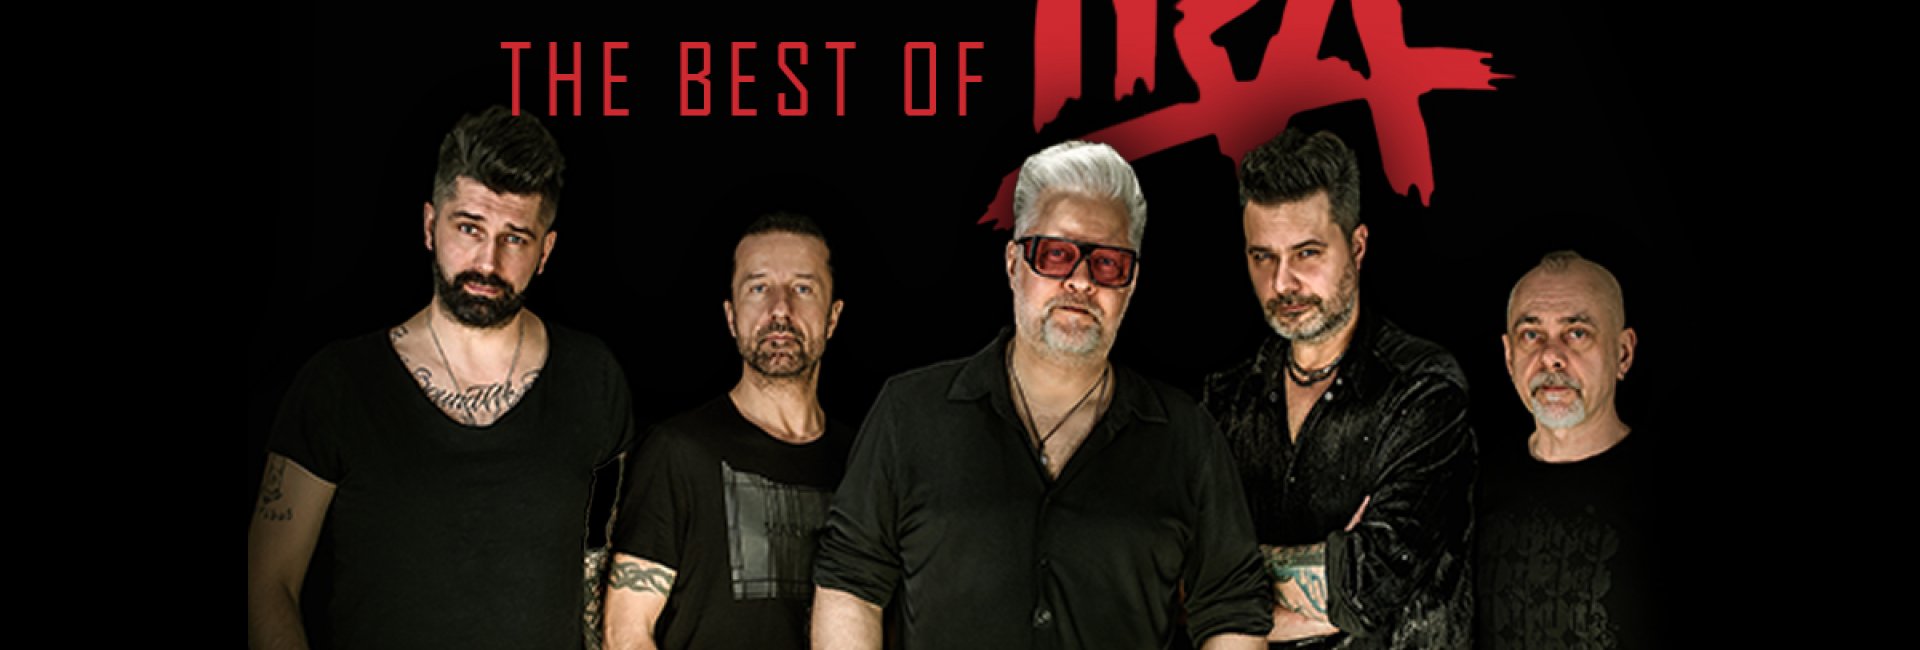 IRA - The Best Of